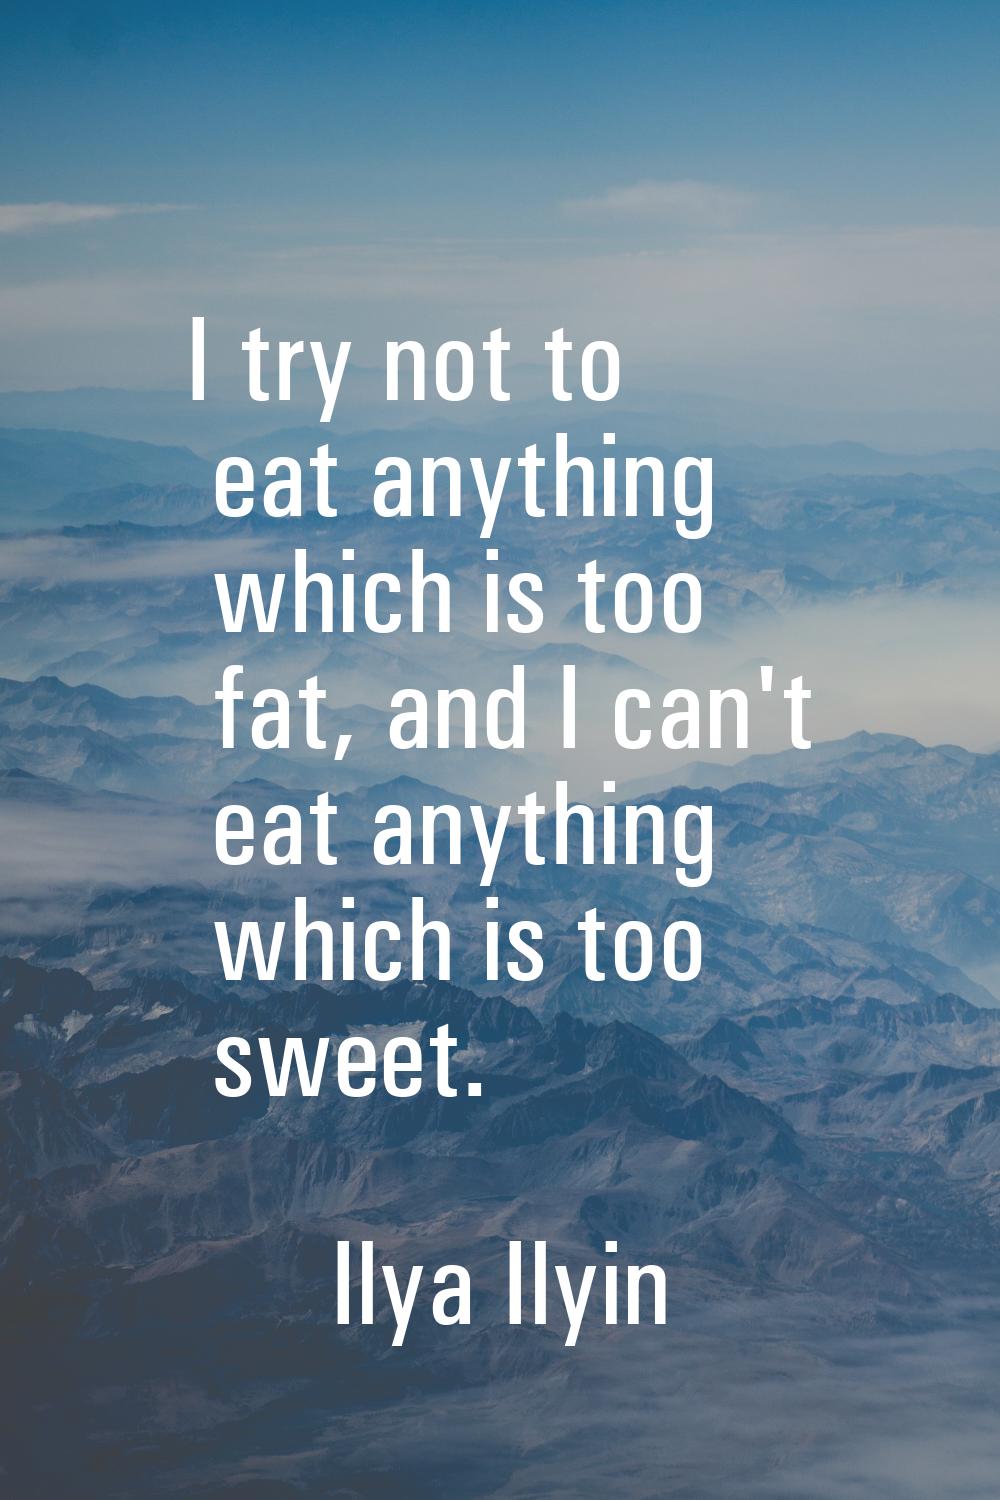 I try not to eat anything which is too fat, and I can't eat anything which is too sweet.